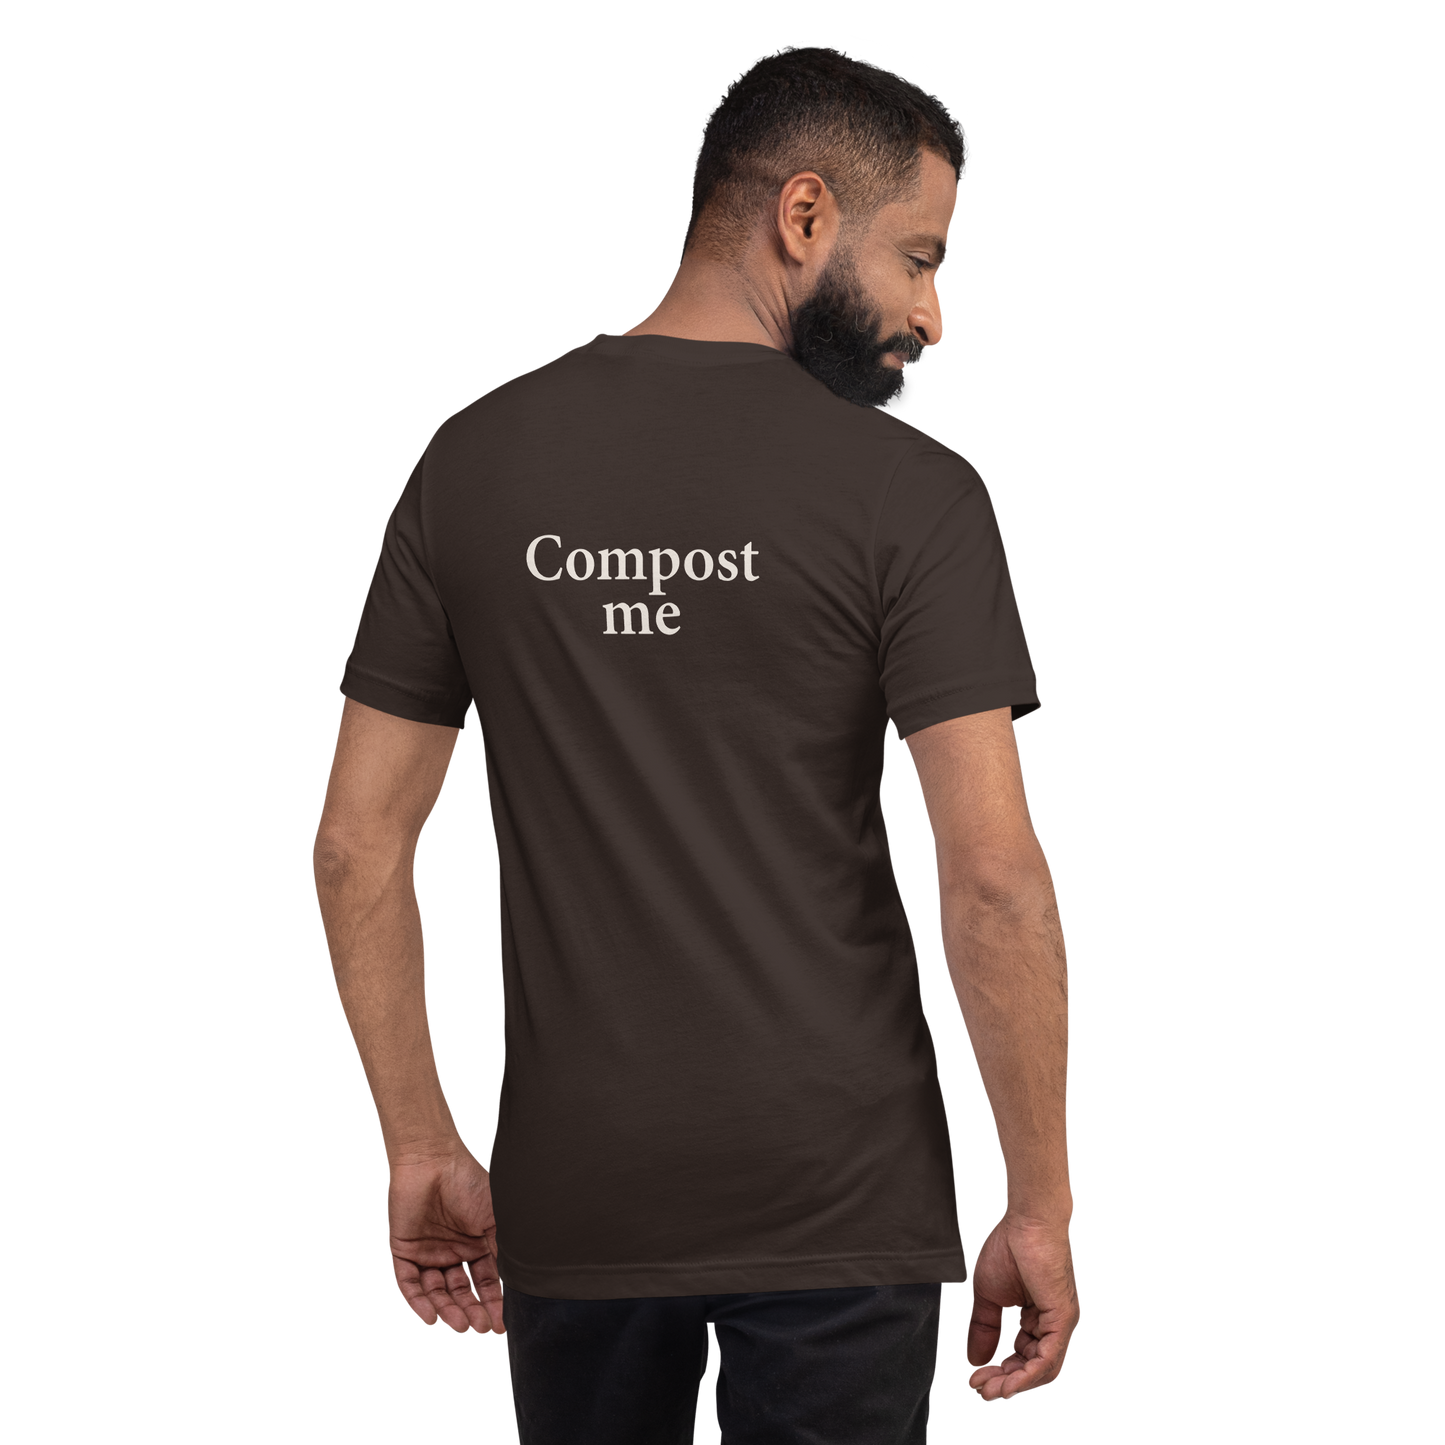 Compost Me by Recompose t-shirt